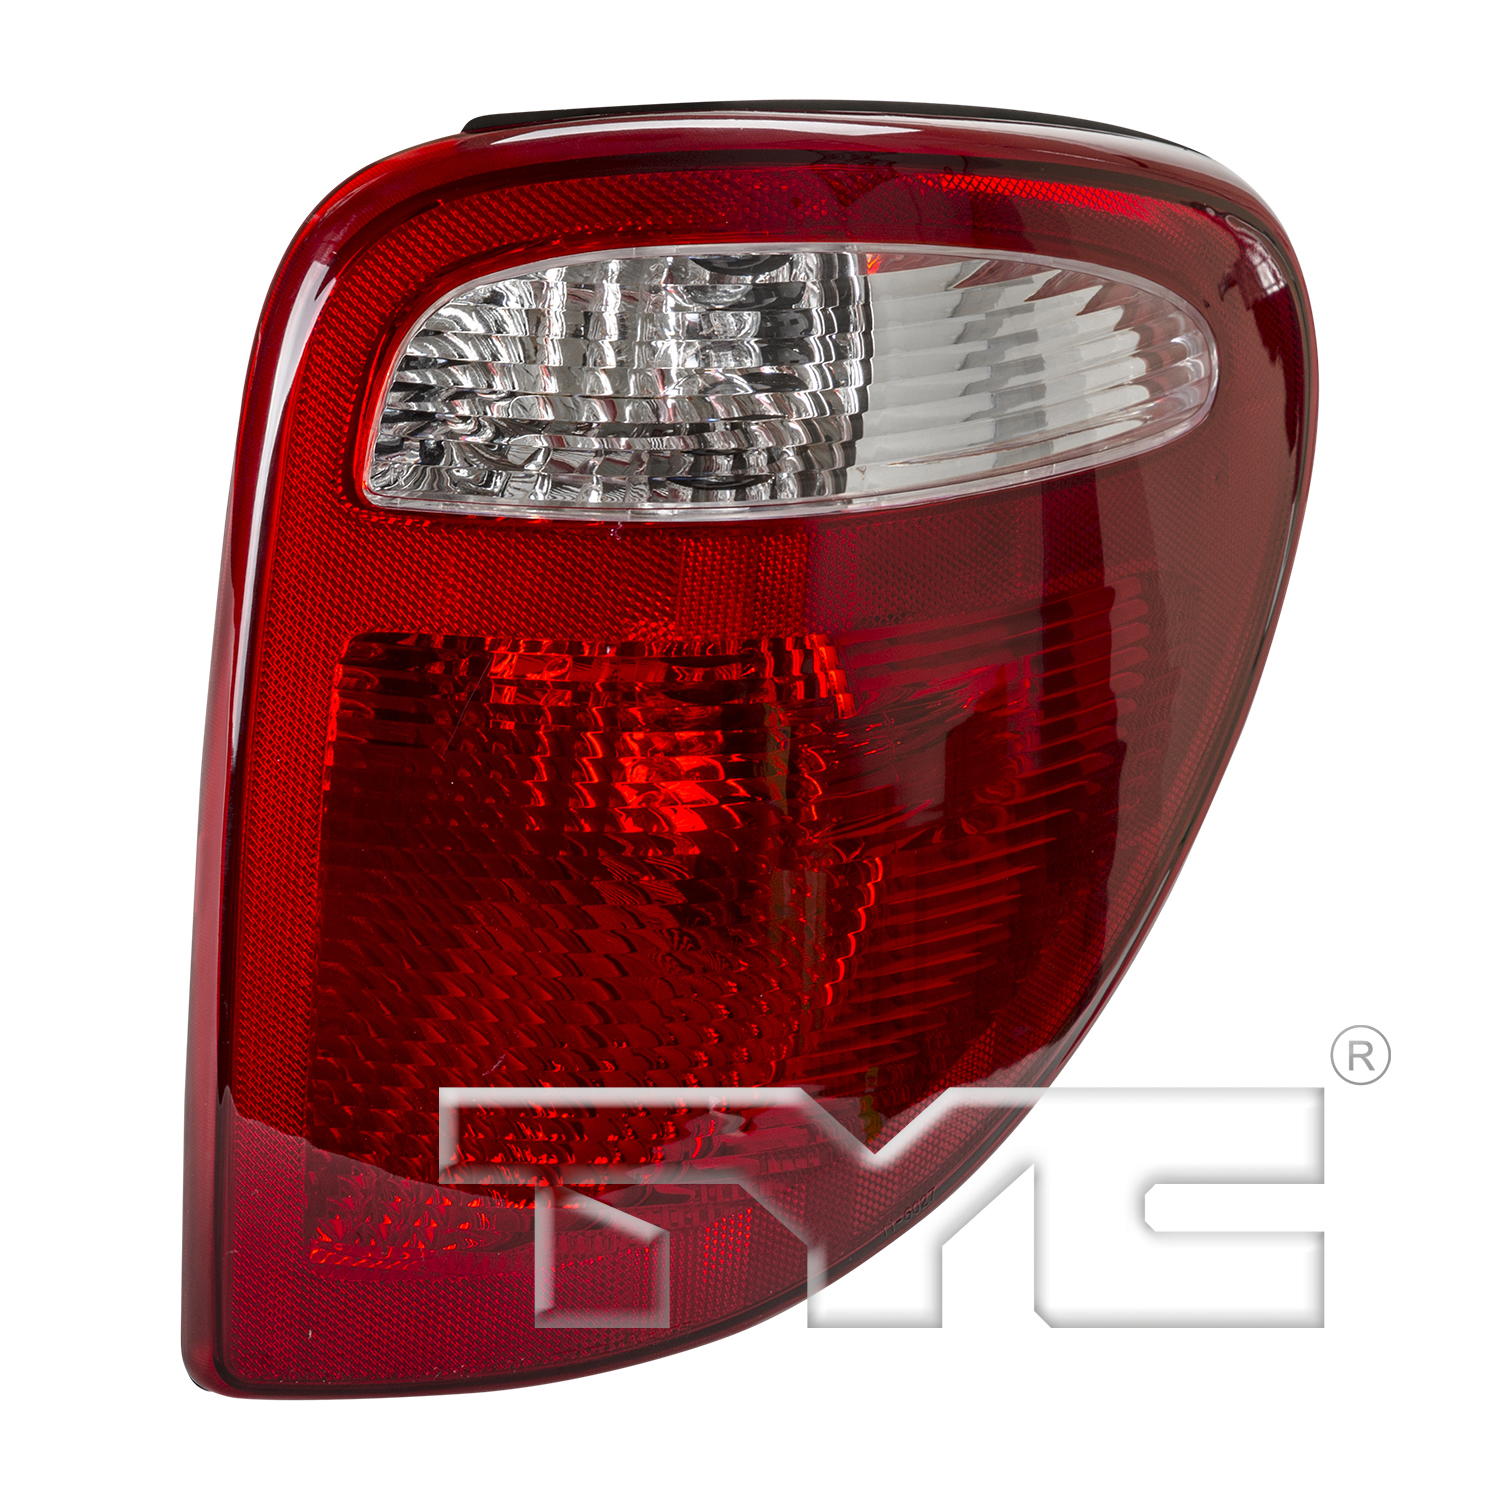 Aftermarket TAILLIGHTS for CHRYSLER - TOWN & COUNTRY, TOWN & COUNTRY,04-07,RT Taillamp assy